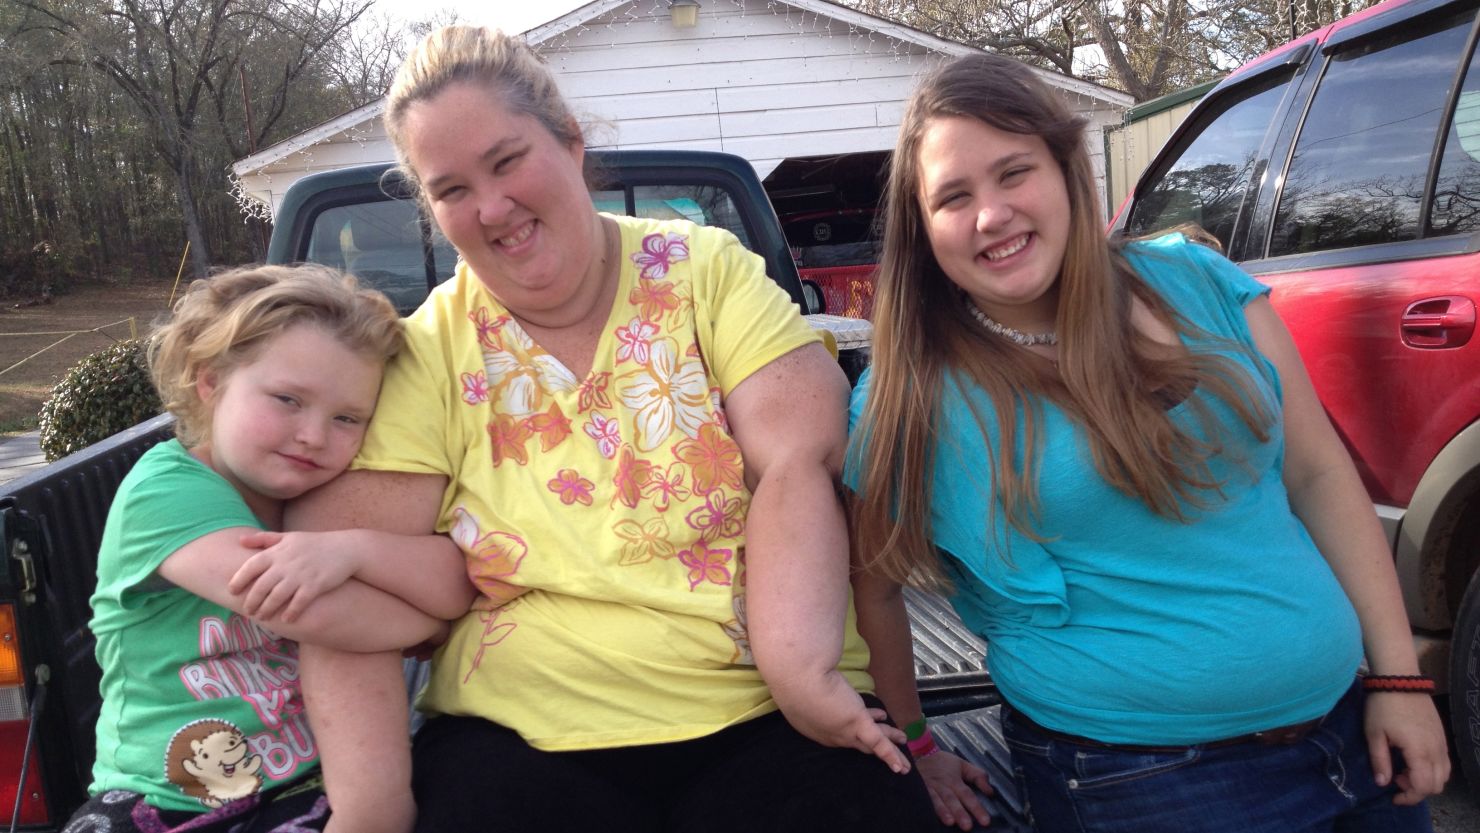 Honey Boo Boo (Alana Thompson), Mama (June Shannon), and Chubbs (Jessica Shannon) sitting on a pickup truck bed.